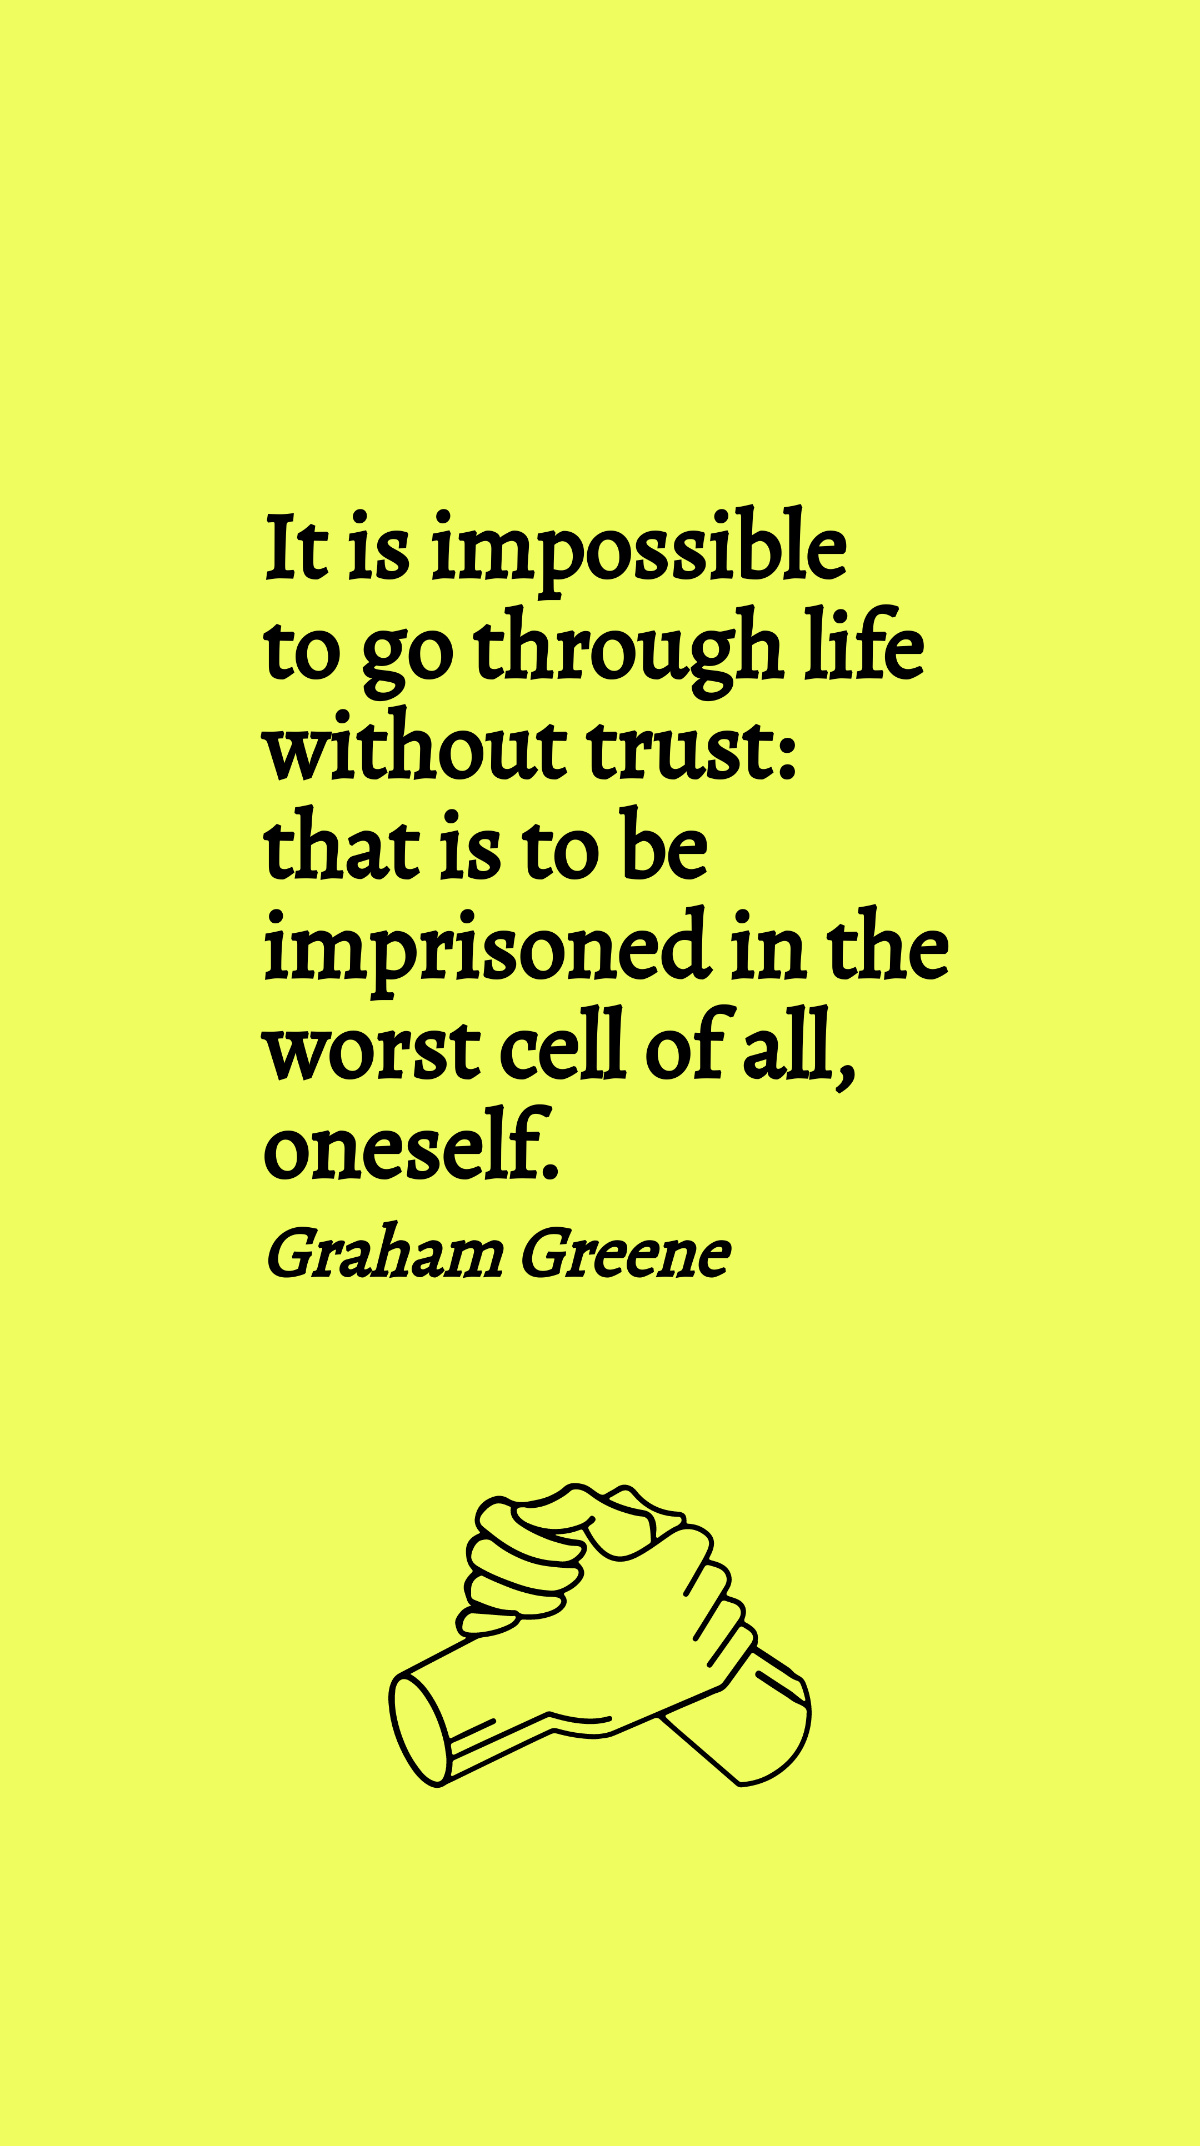 Free Graham Greene - It is impossible to go through life without trust: that is to be imprisoned in the worst cell of all, oneself. Template